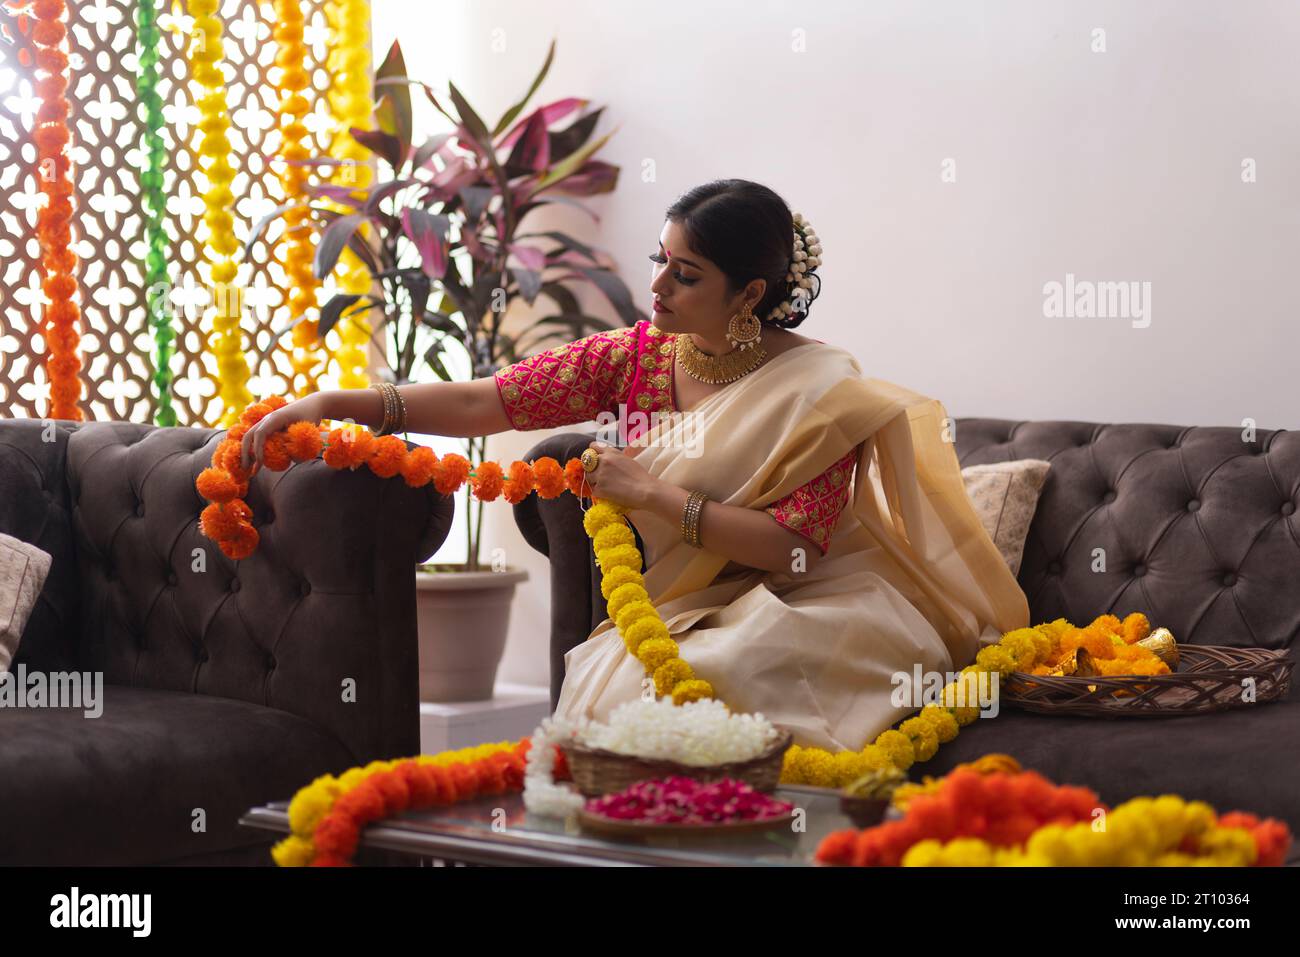 South Indian Woman in white saree garlanding flowers to celebrate Onam Stock Photo